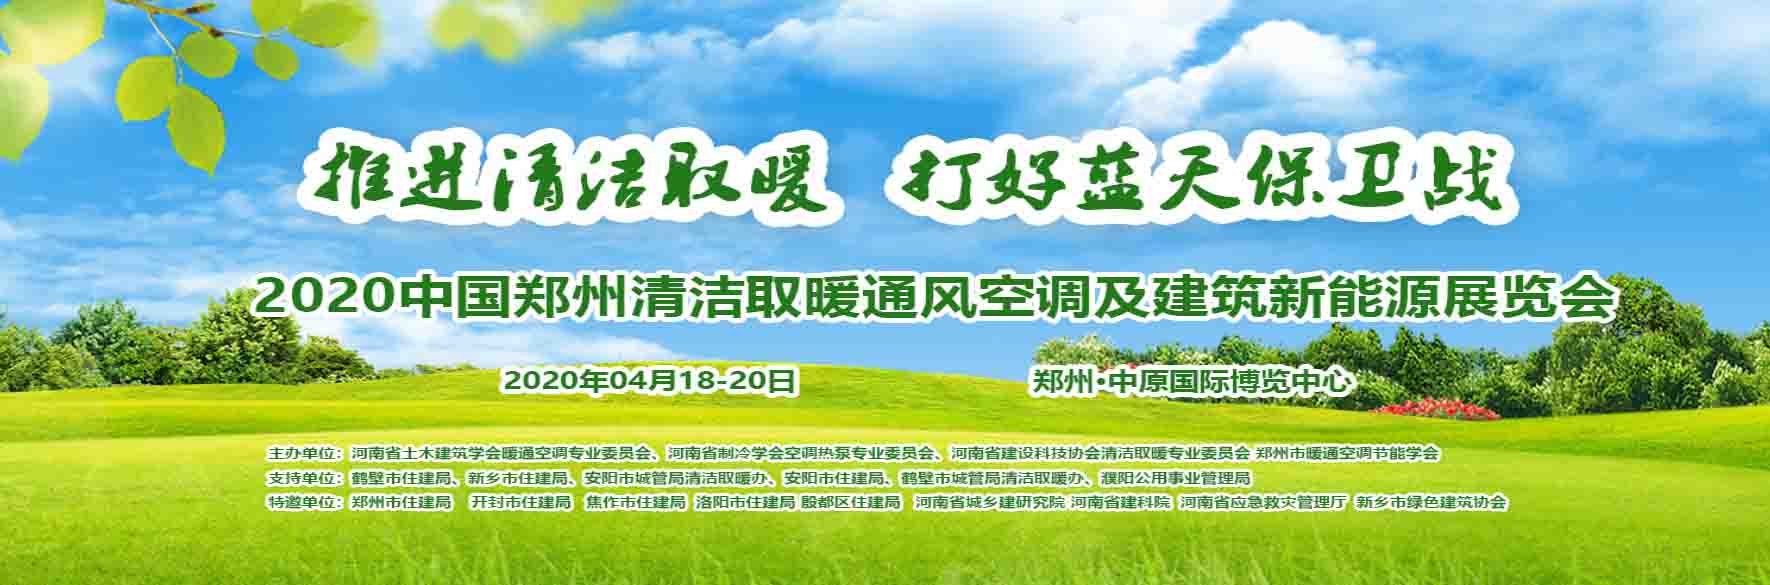 2020 Ninth China Zhengzhou Clean Heating, Ventilation, Air Conditioning and Building New Energy Exhibition